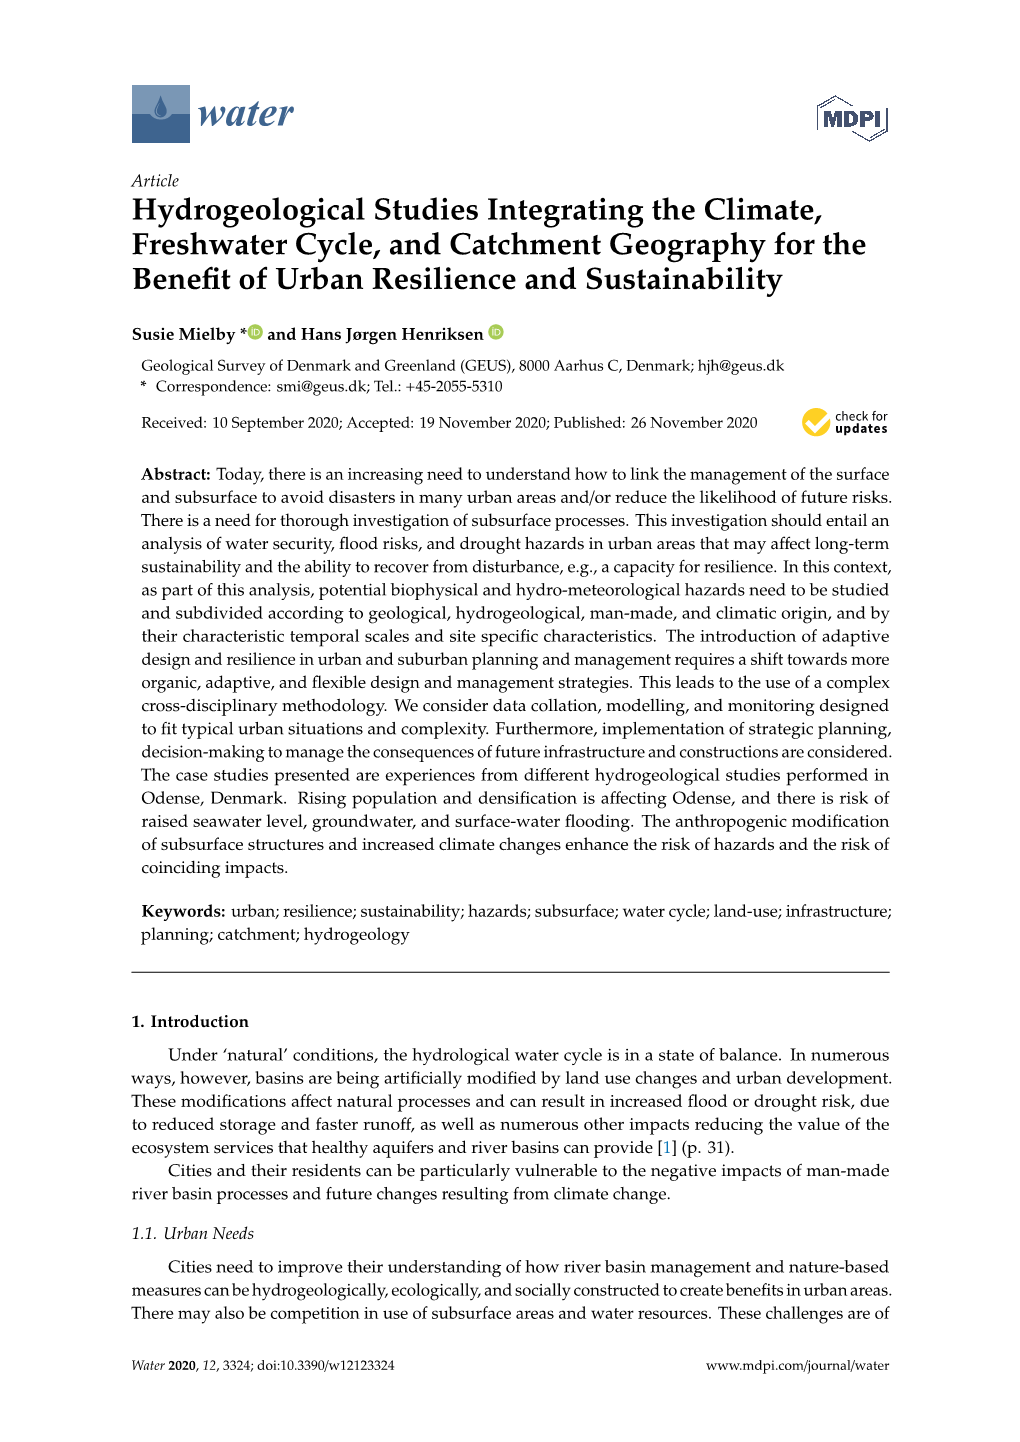 Hydrogeological Studies Integrating the Climate, Freshwater Cycle, and Catchment Geography for the Beneﬁt of Urban Resilience and Sustainability